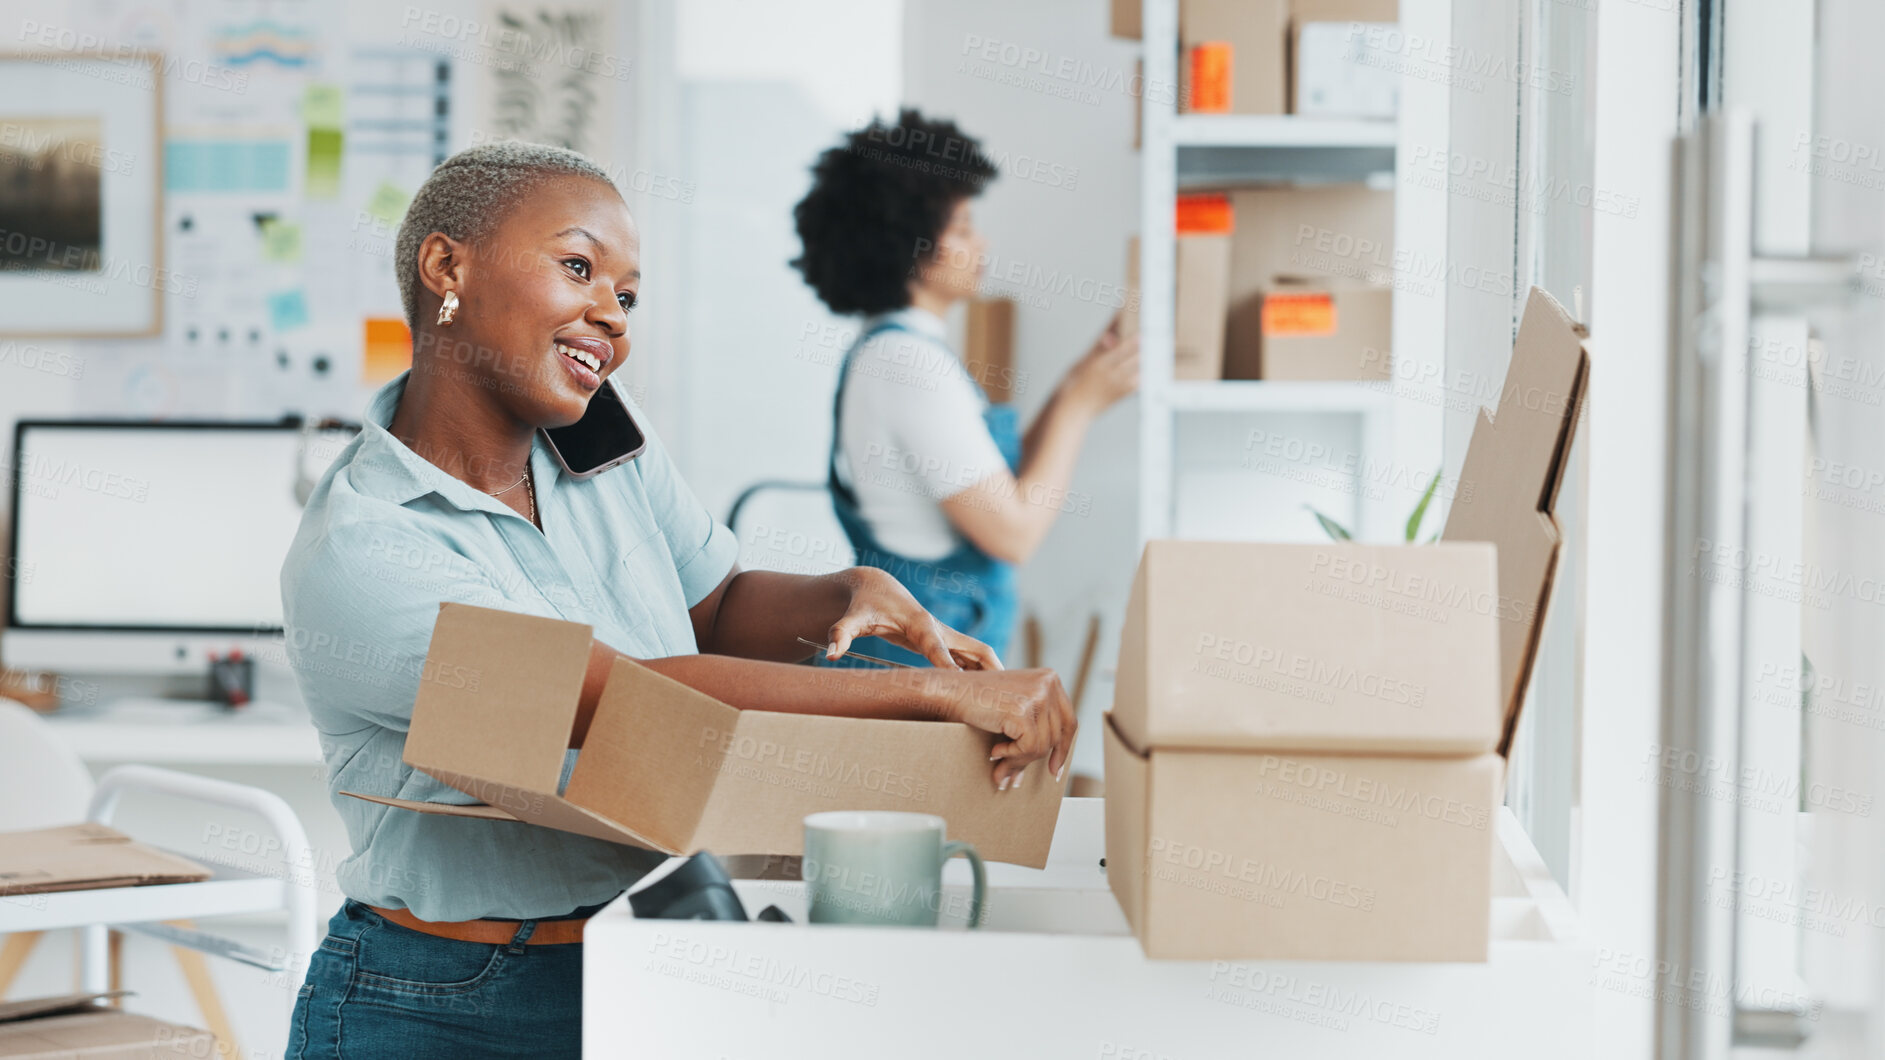 Buy stock photo Ecommerce boxes, phone call or happy black woman chat about logistics, shipping and work on cardboard packaging. Cellphone, distribution or African person talk about supply, delivery service or order